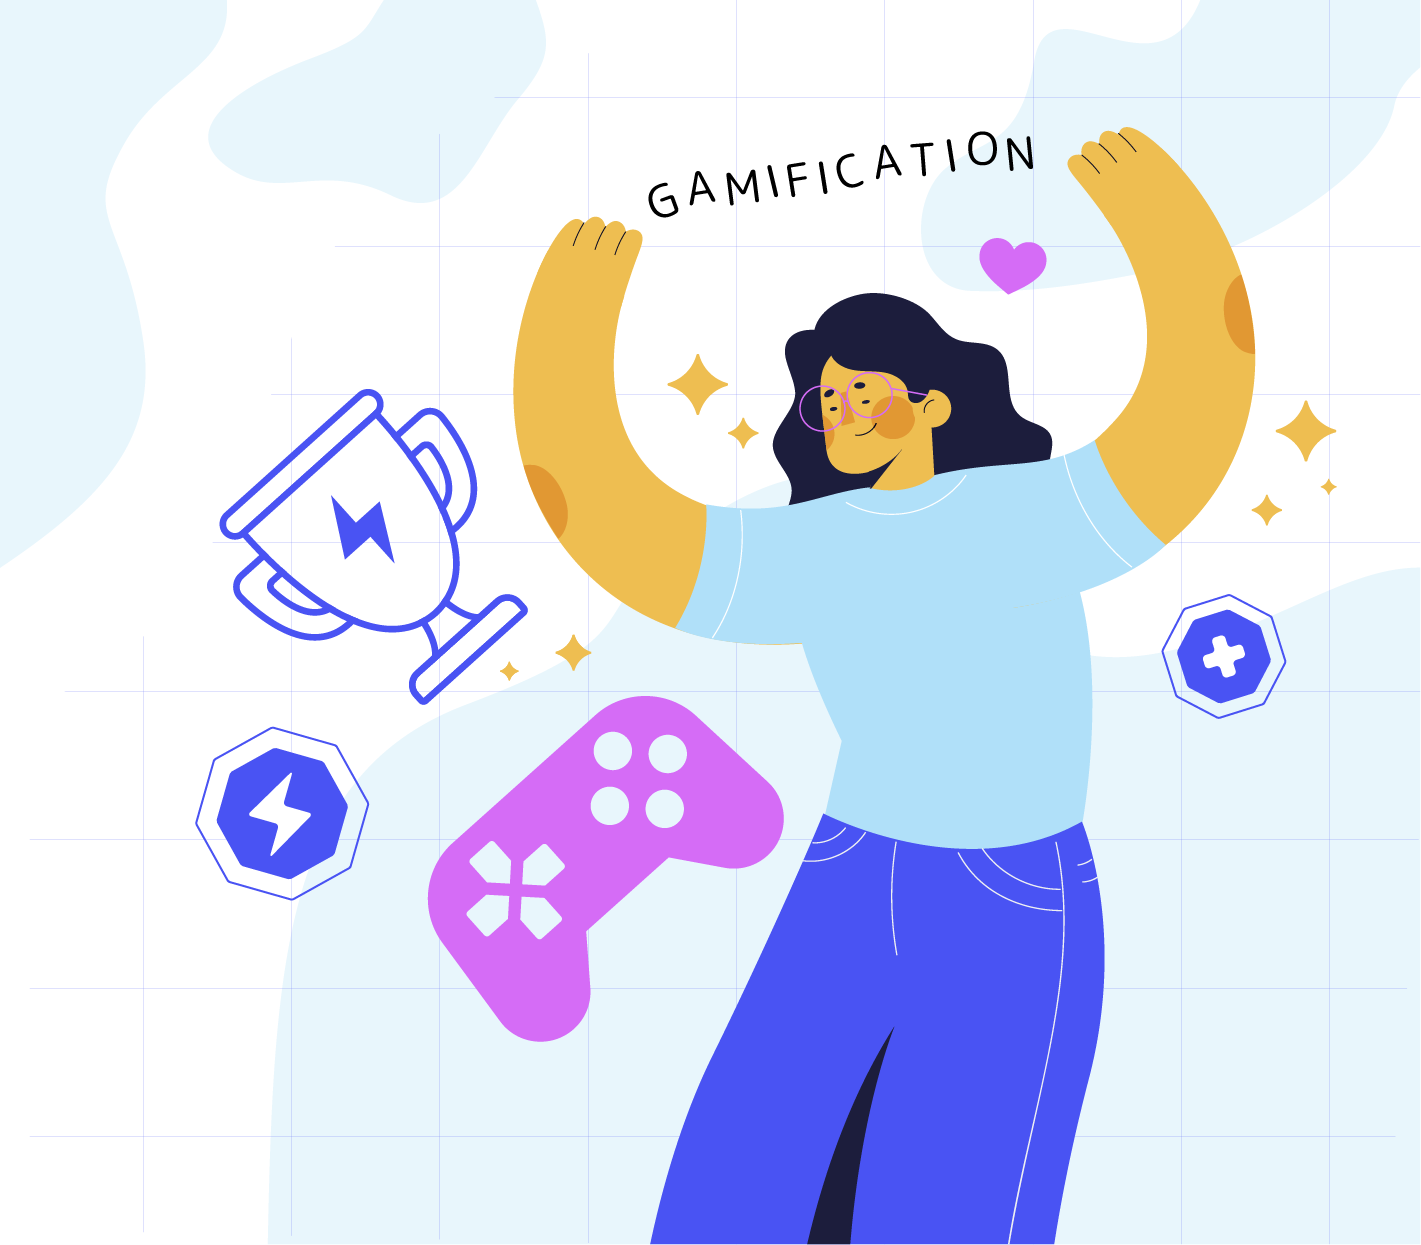 Implement gamification in online course